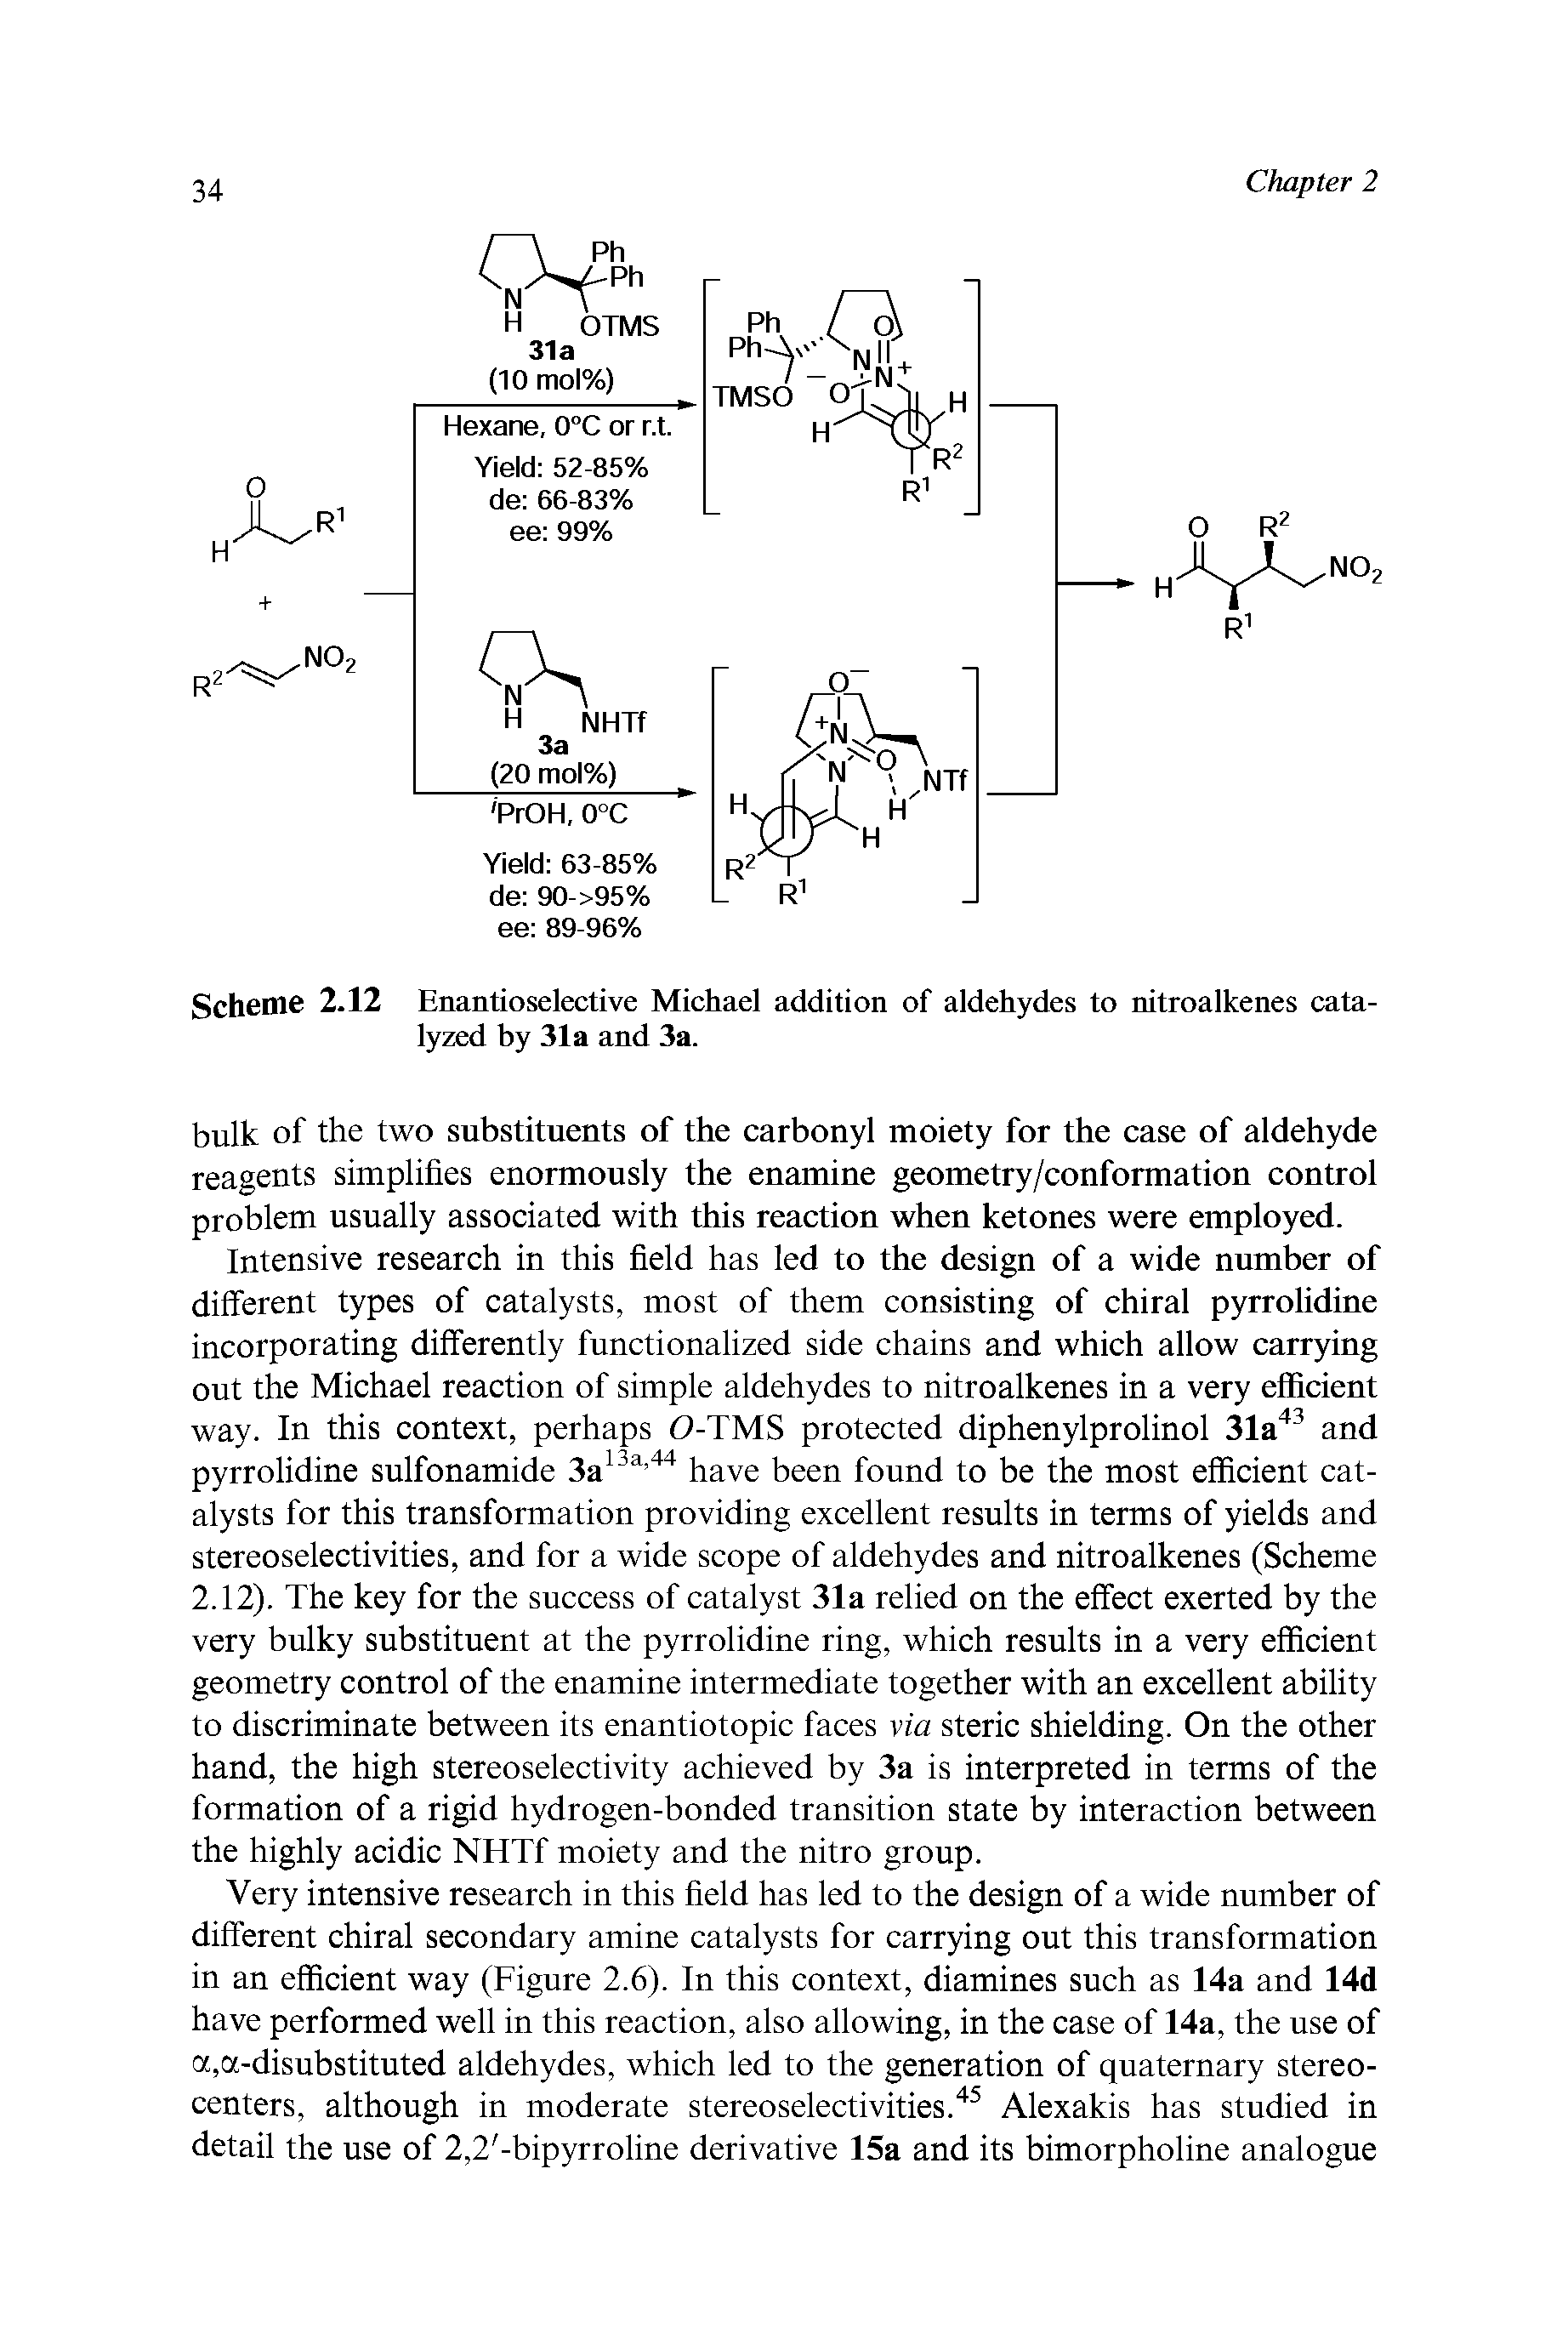 Scheme 2.12 Enantioselective Michael addition of aldehydes to nitroalkenes catalyzed by 31a and 3a.